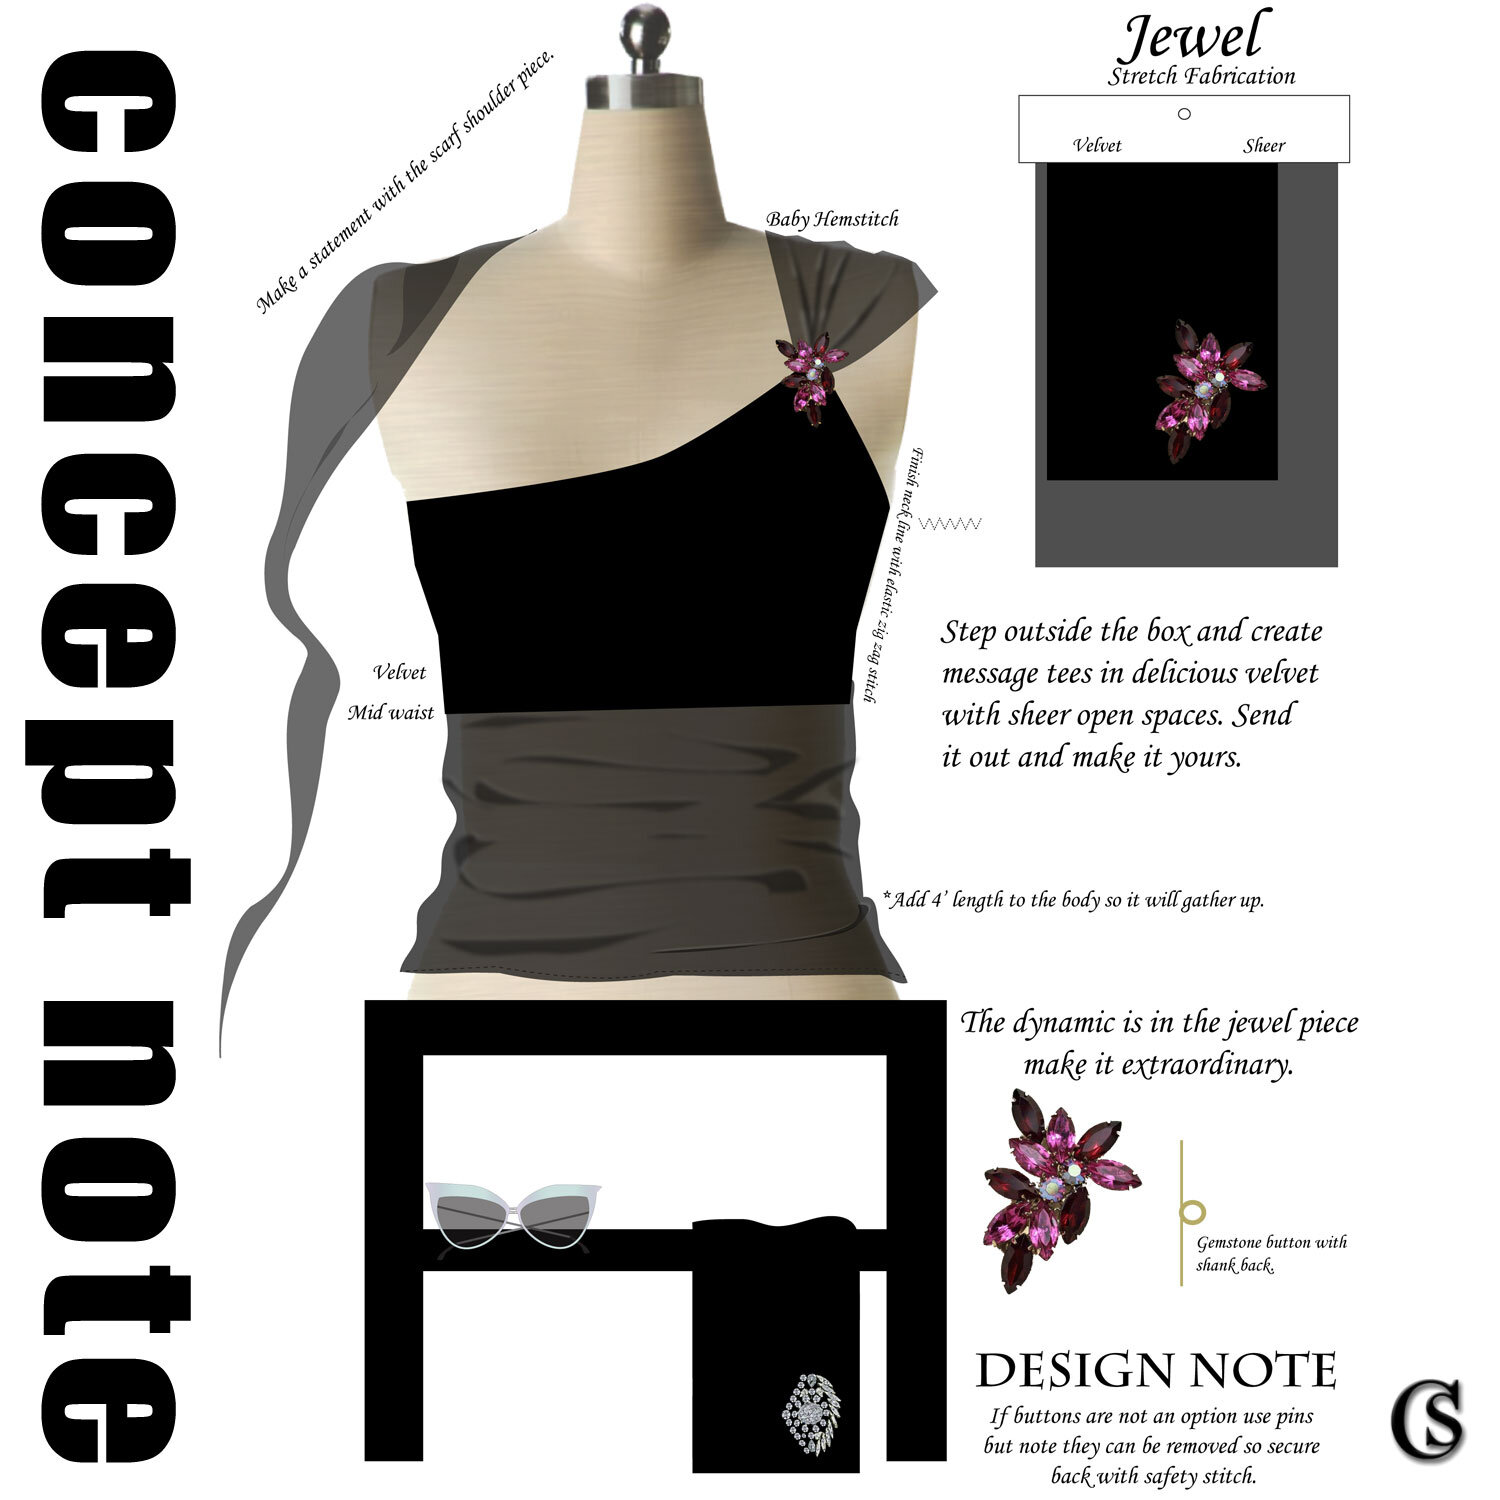 concept-notes-2021-chiaristyle-jewels-and-velvet.jpg